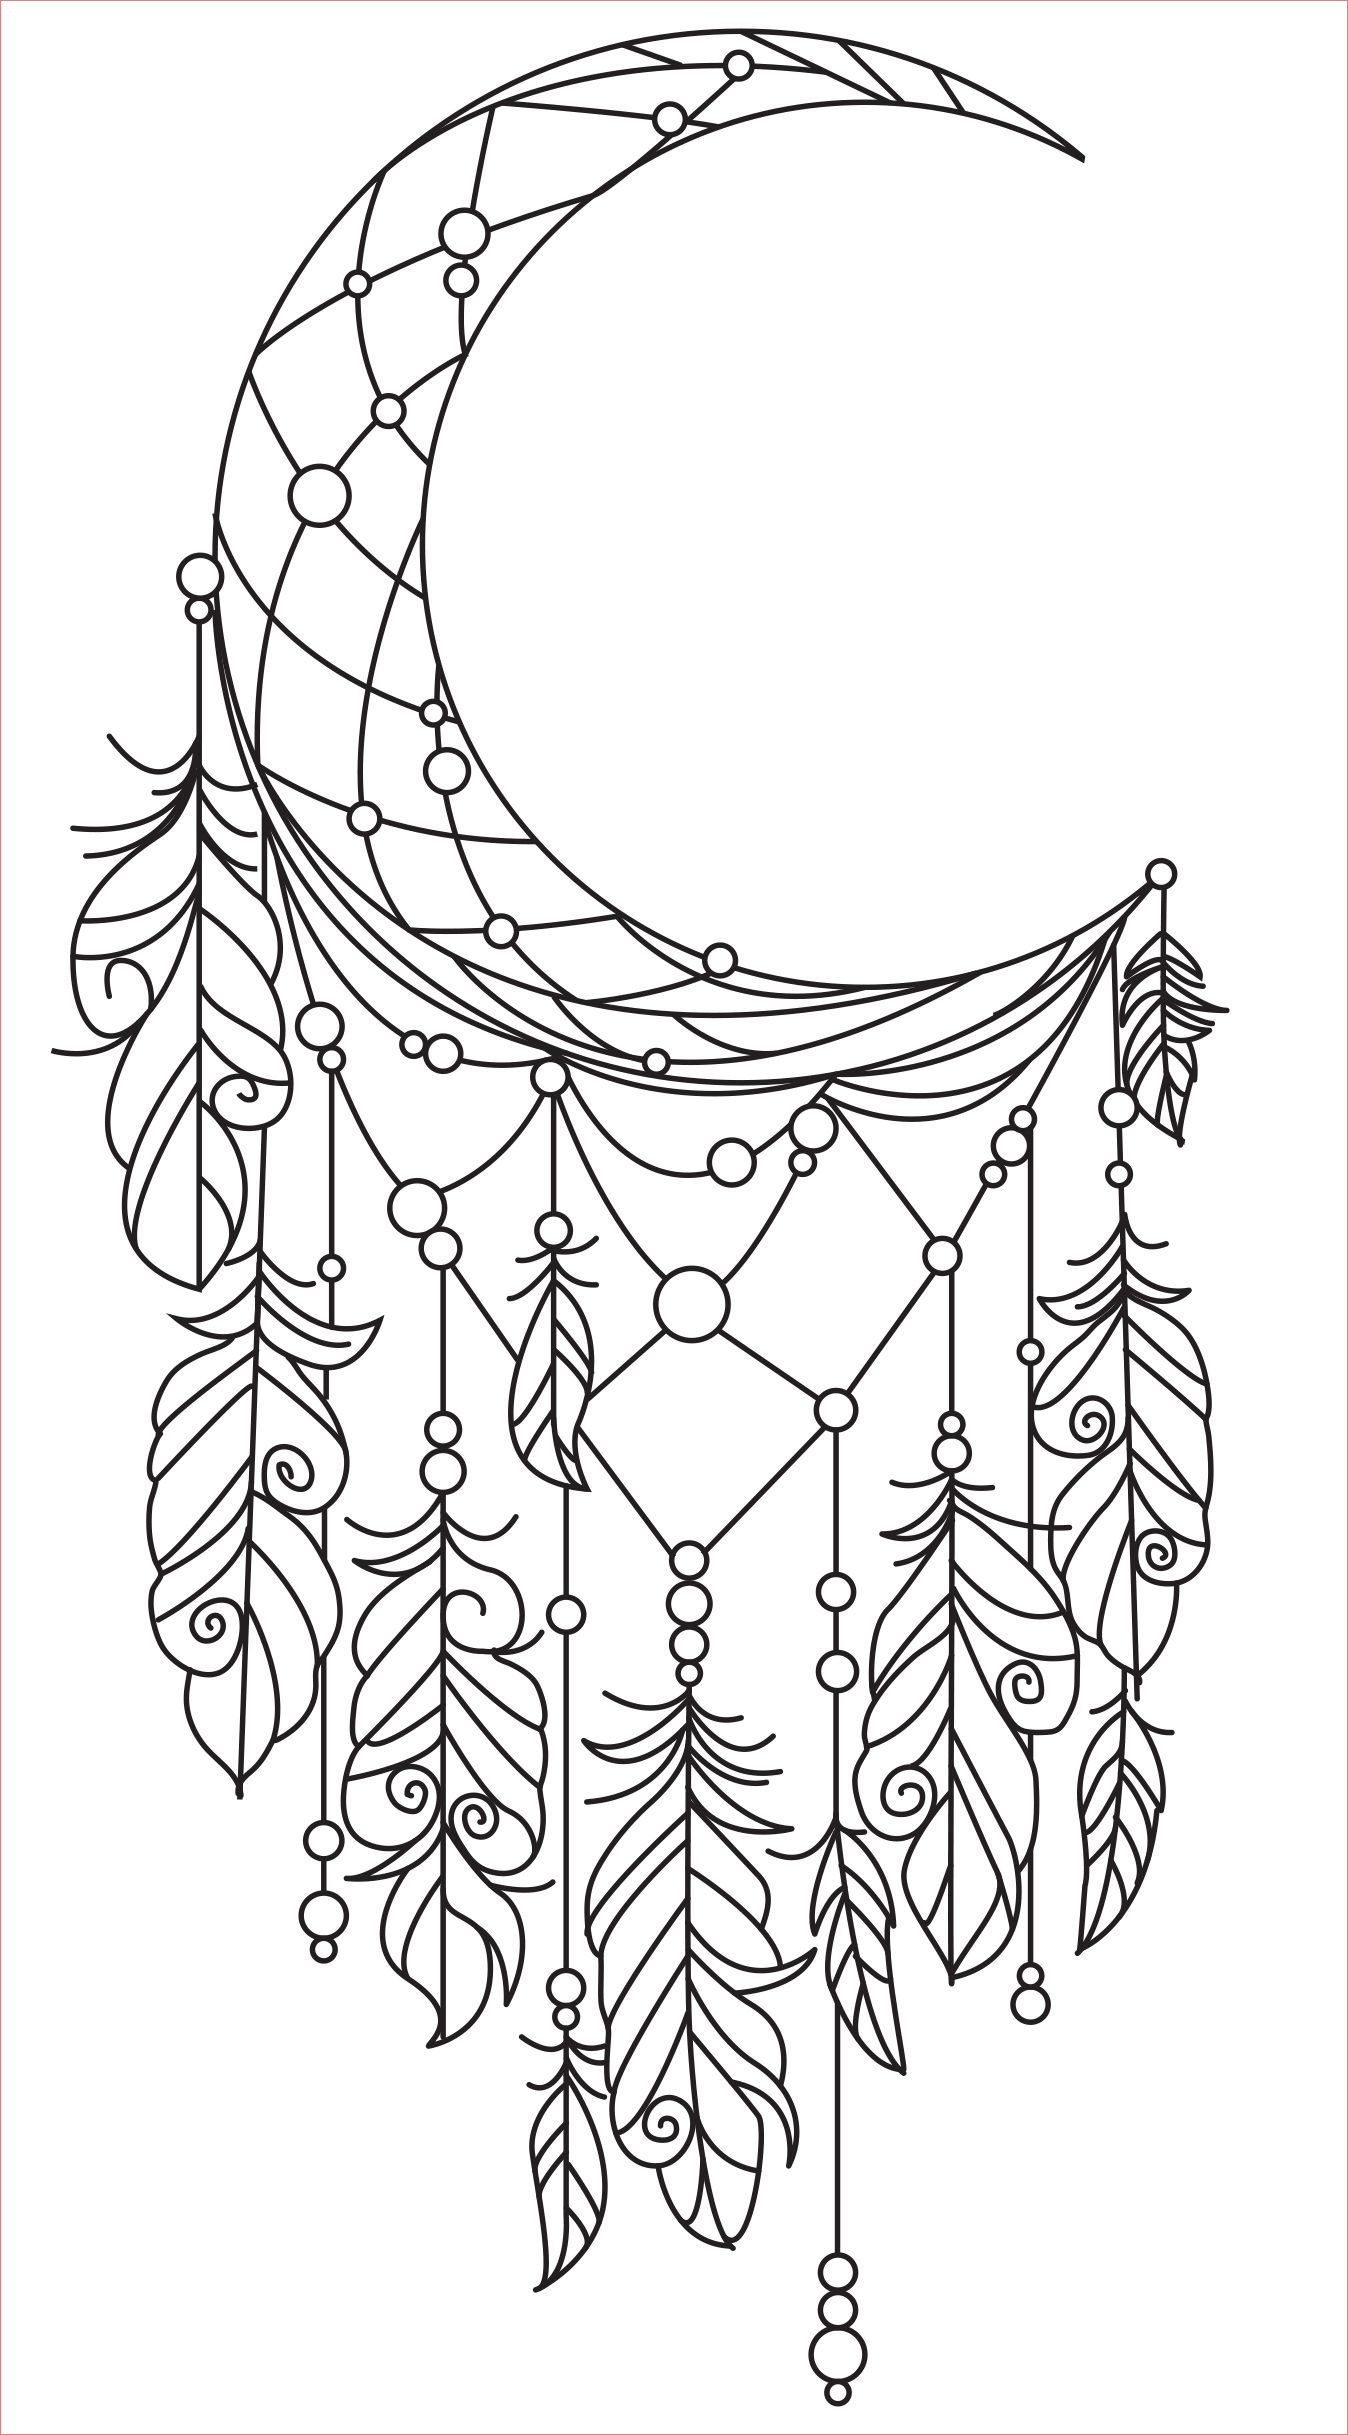 Coloriage Attrape Reve Nice Pin By Patty Baa On Great Items